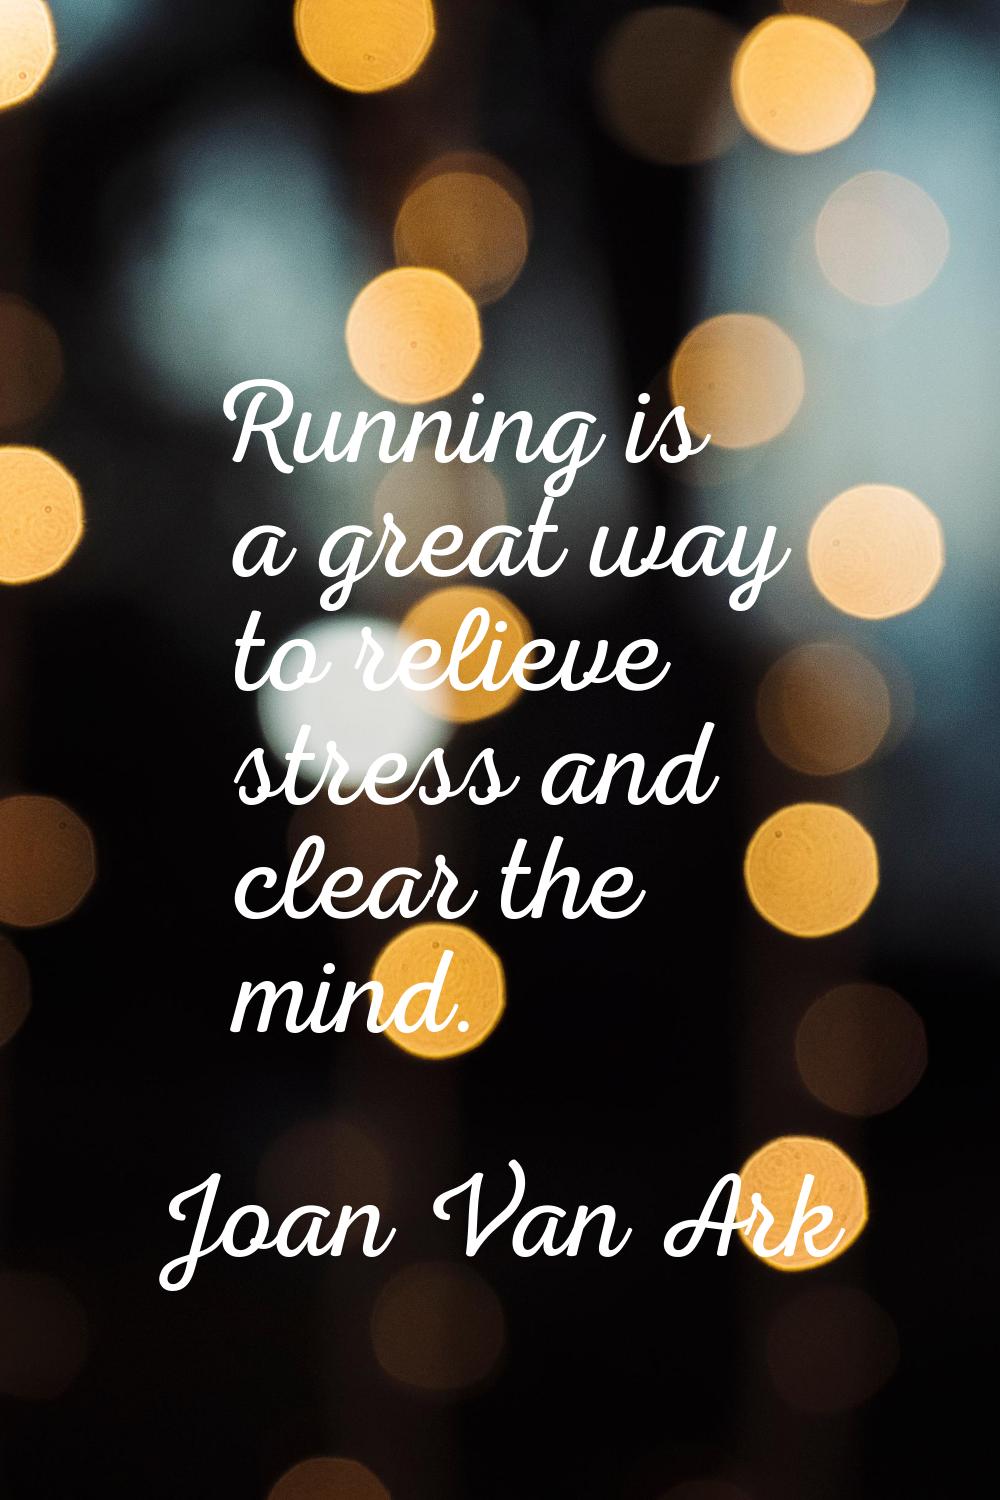 Running is a great way to relieve stress and clear the mind.